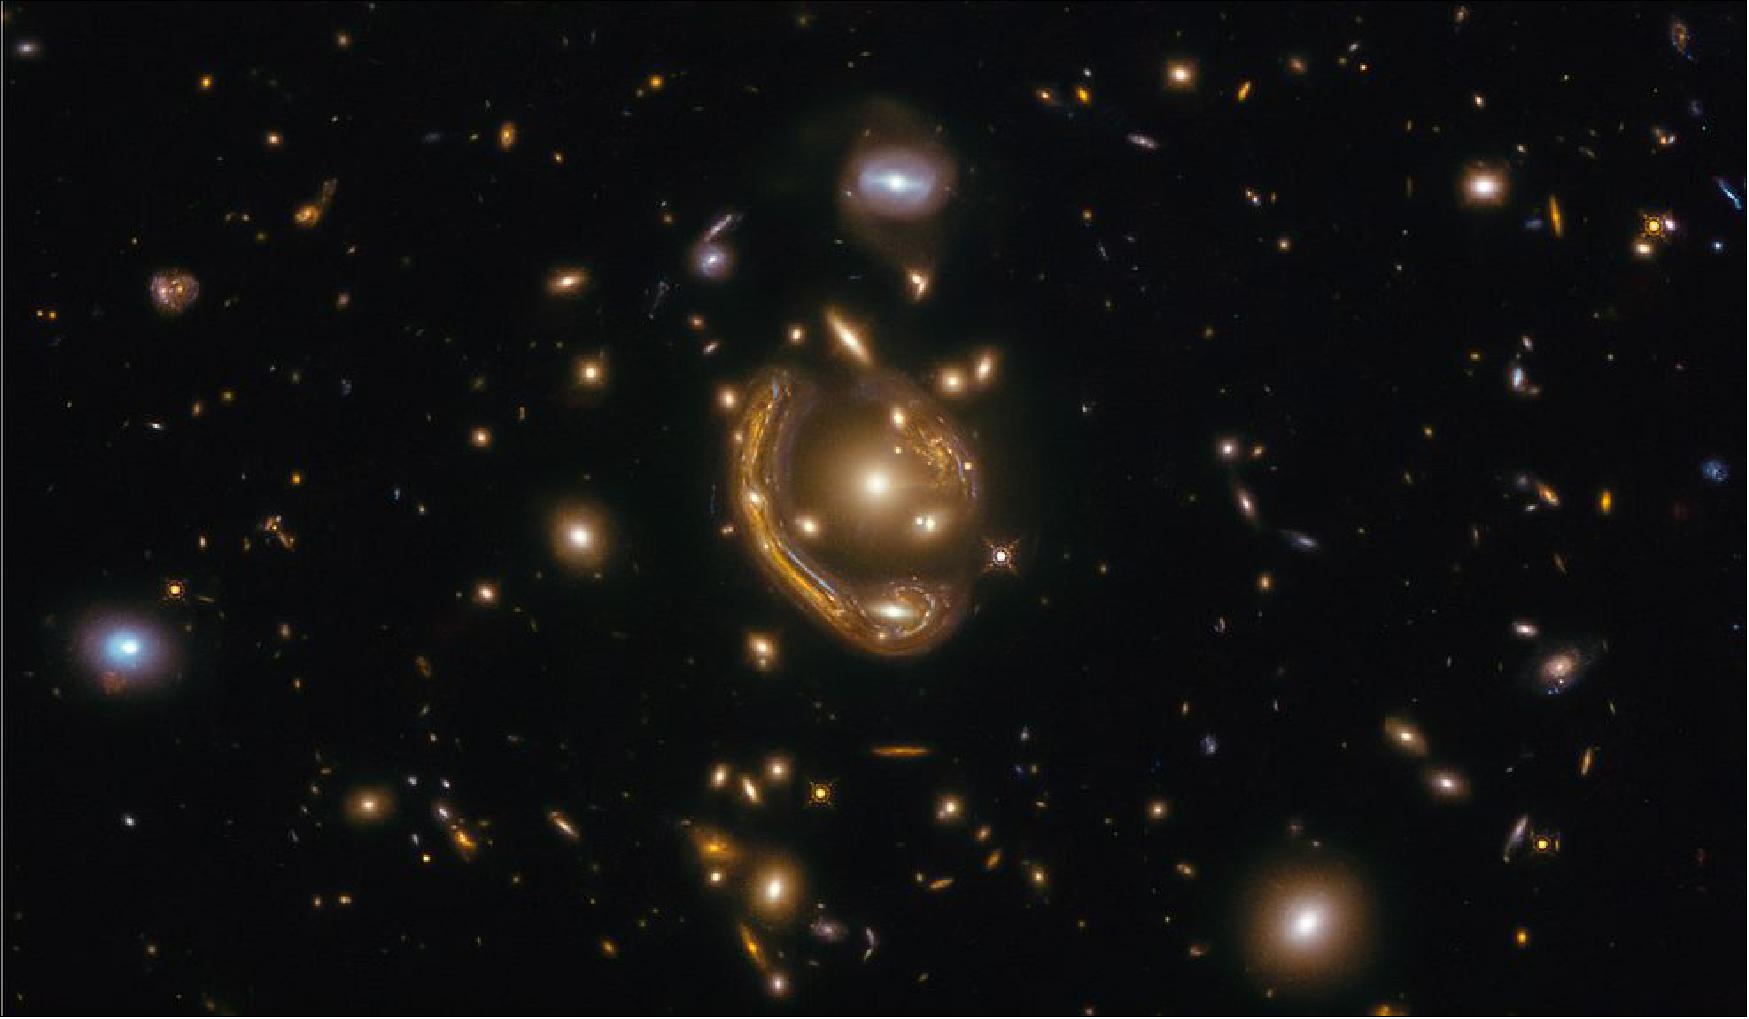 Figure 45: In this image, a remote galaxy is greatly magnified and distorted by the effects of gravitationally warped space. After its public release, astronomers used the picture to measure the galaxy's distance of 9.4 billion light-years. This places the galaxy at the peak epoch of star formation in cosmic evolution [image credit: Saurabh Jha (Rutgers, The State University of New Jersey); Release credit: NASA, ESA; Image credit: ESA/Hubble & NASA, S. Jha; Acknowledgment: L. Shatz]